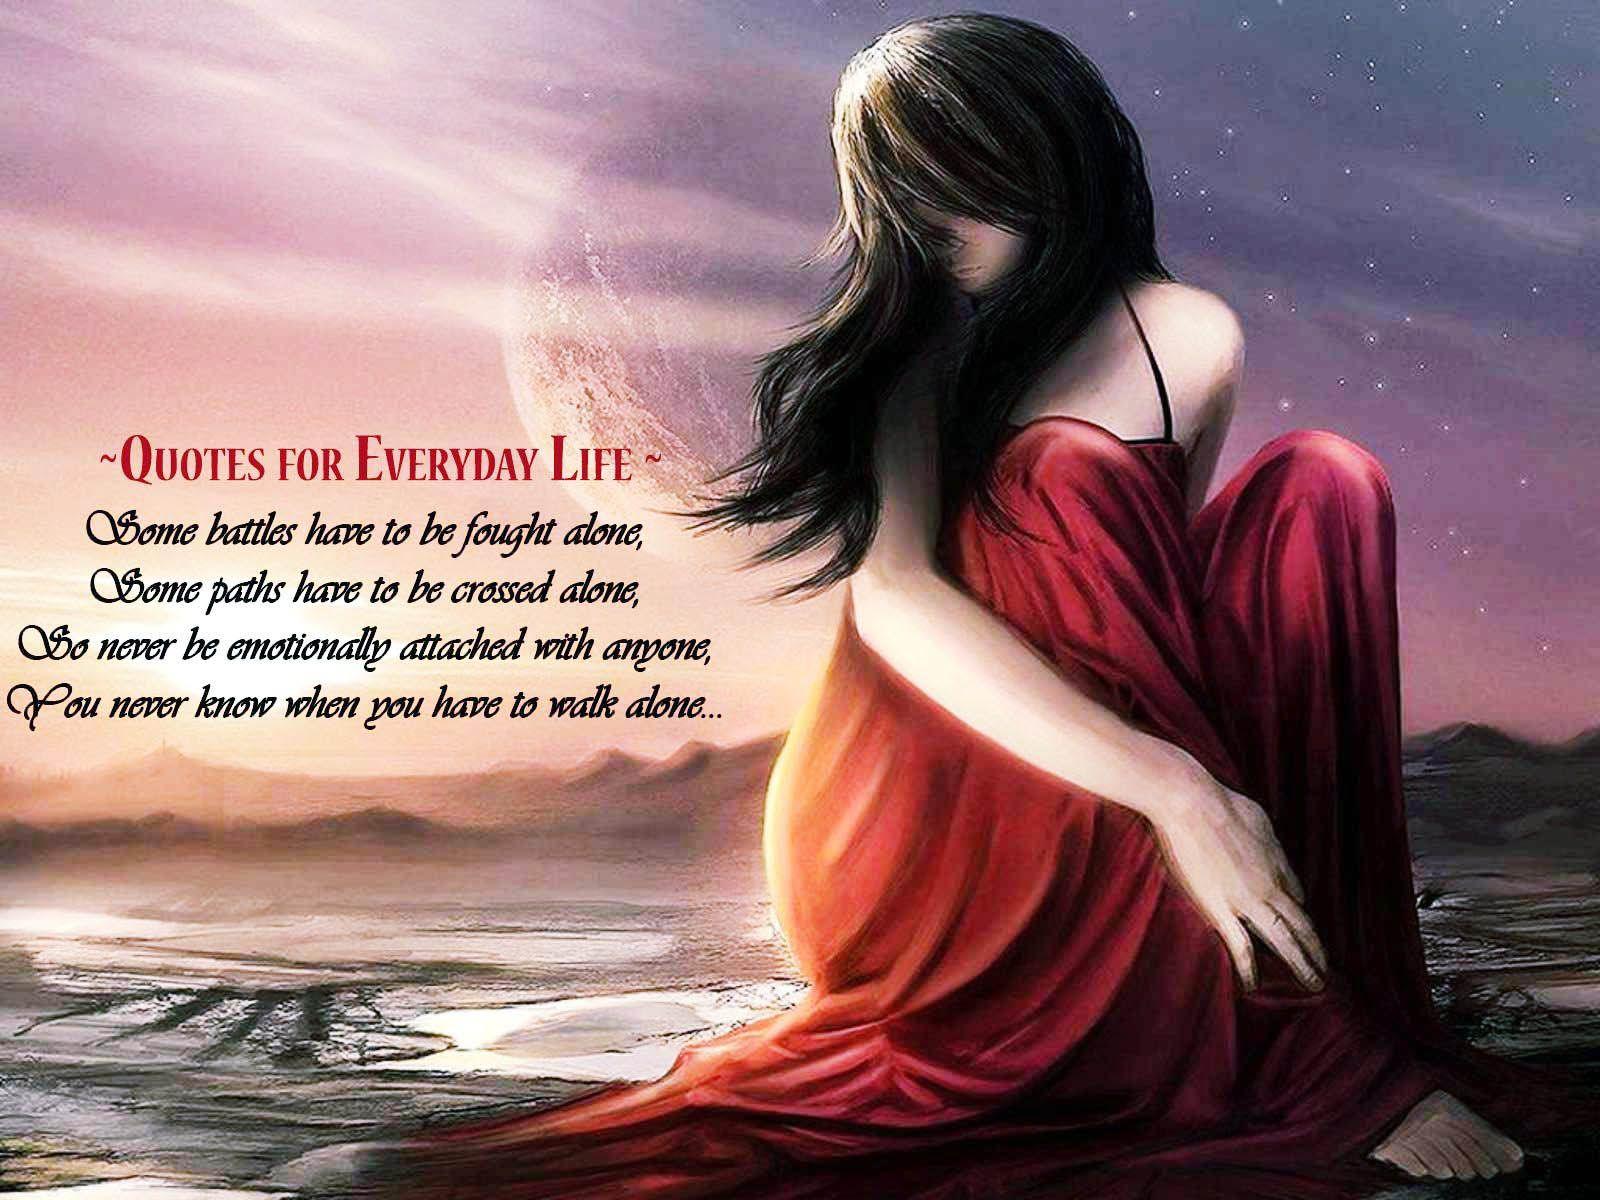 Love breakup wallpapers with quotes Free download